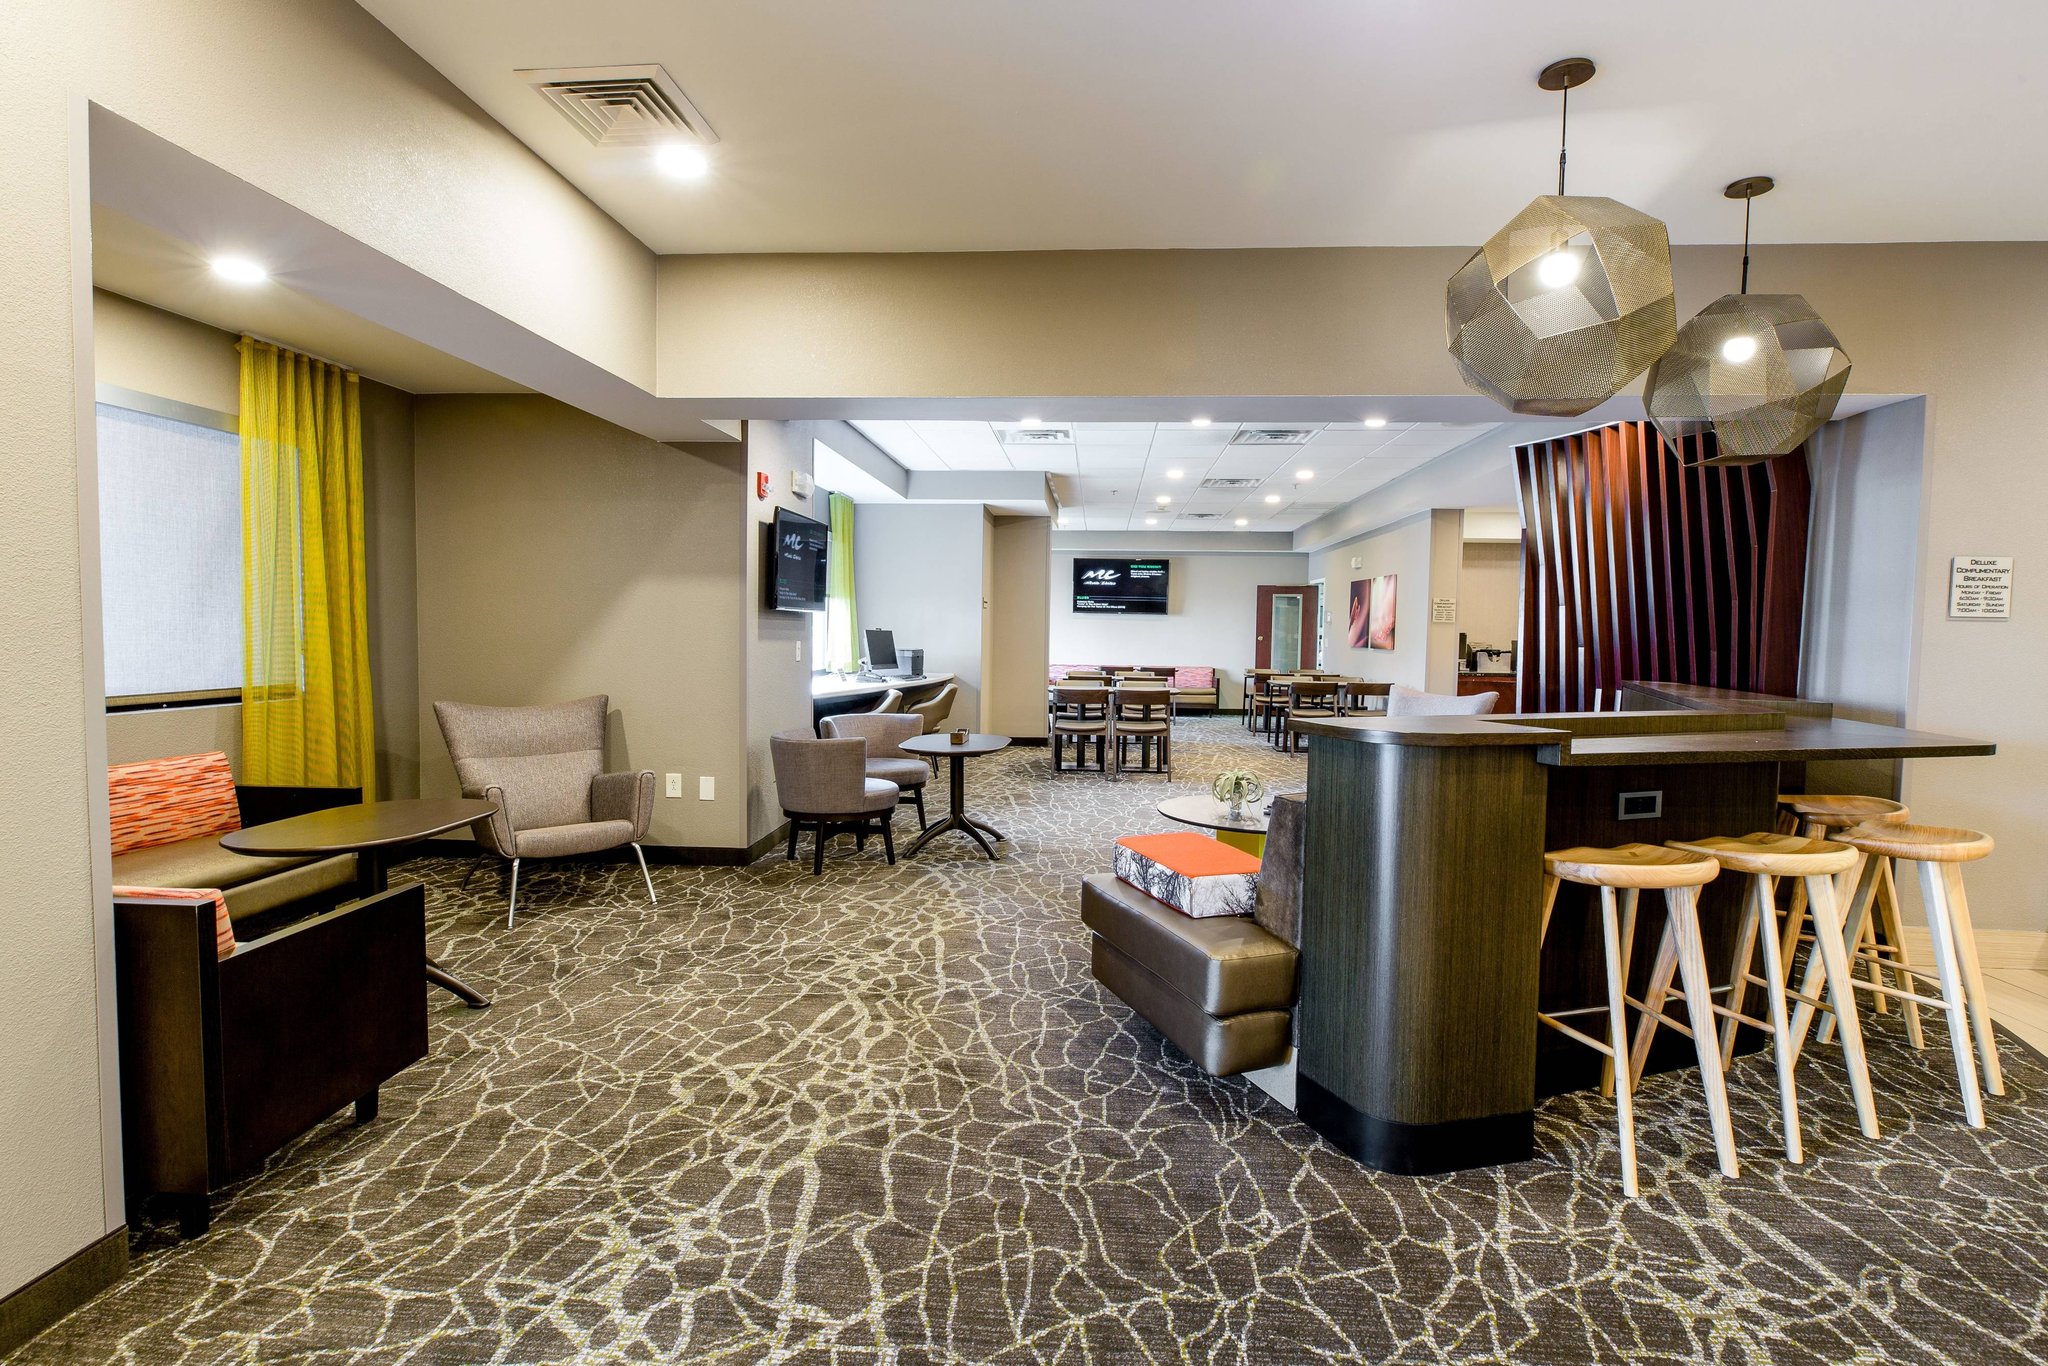 Springhill Suites Florence